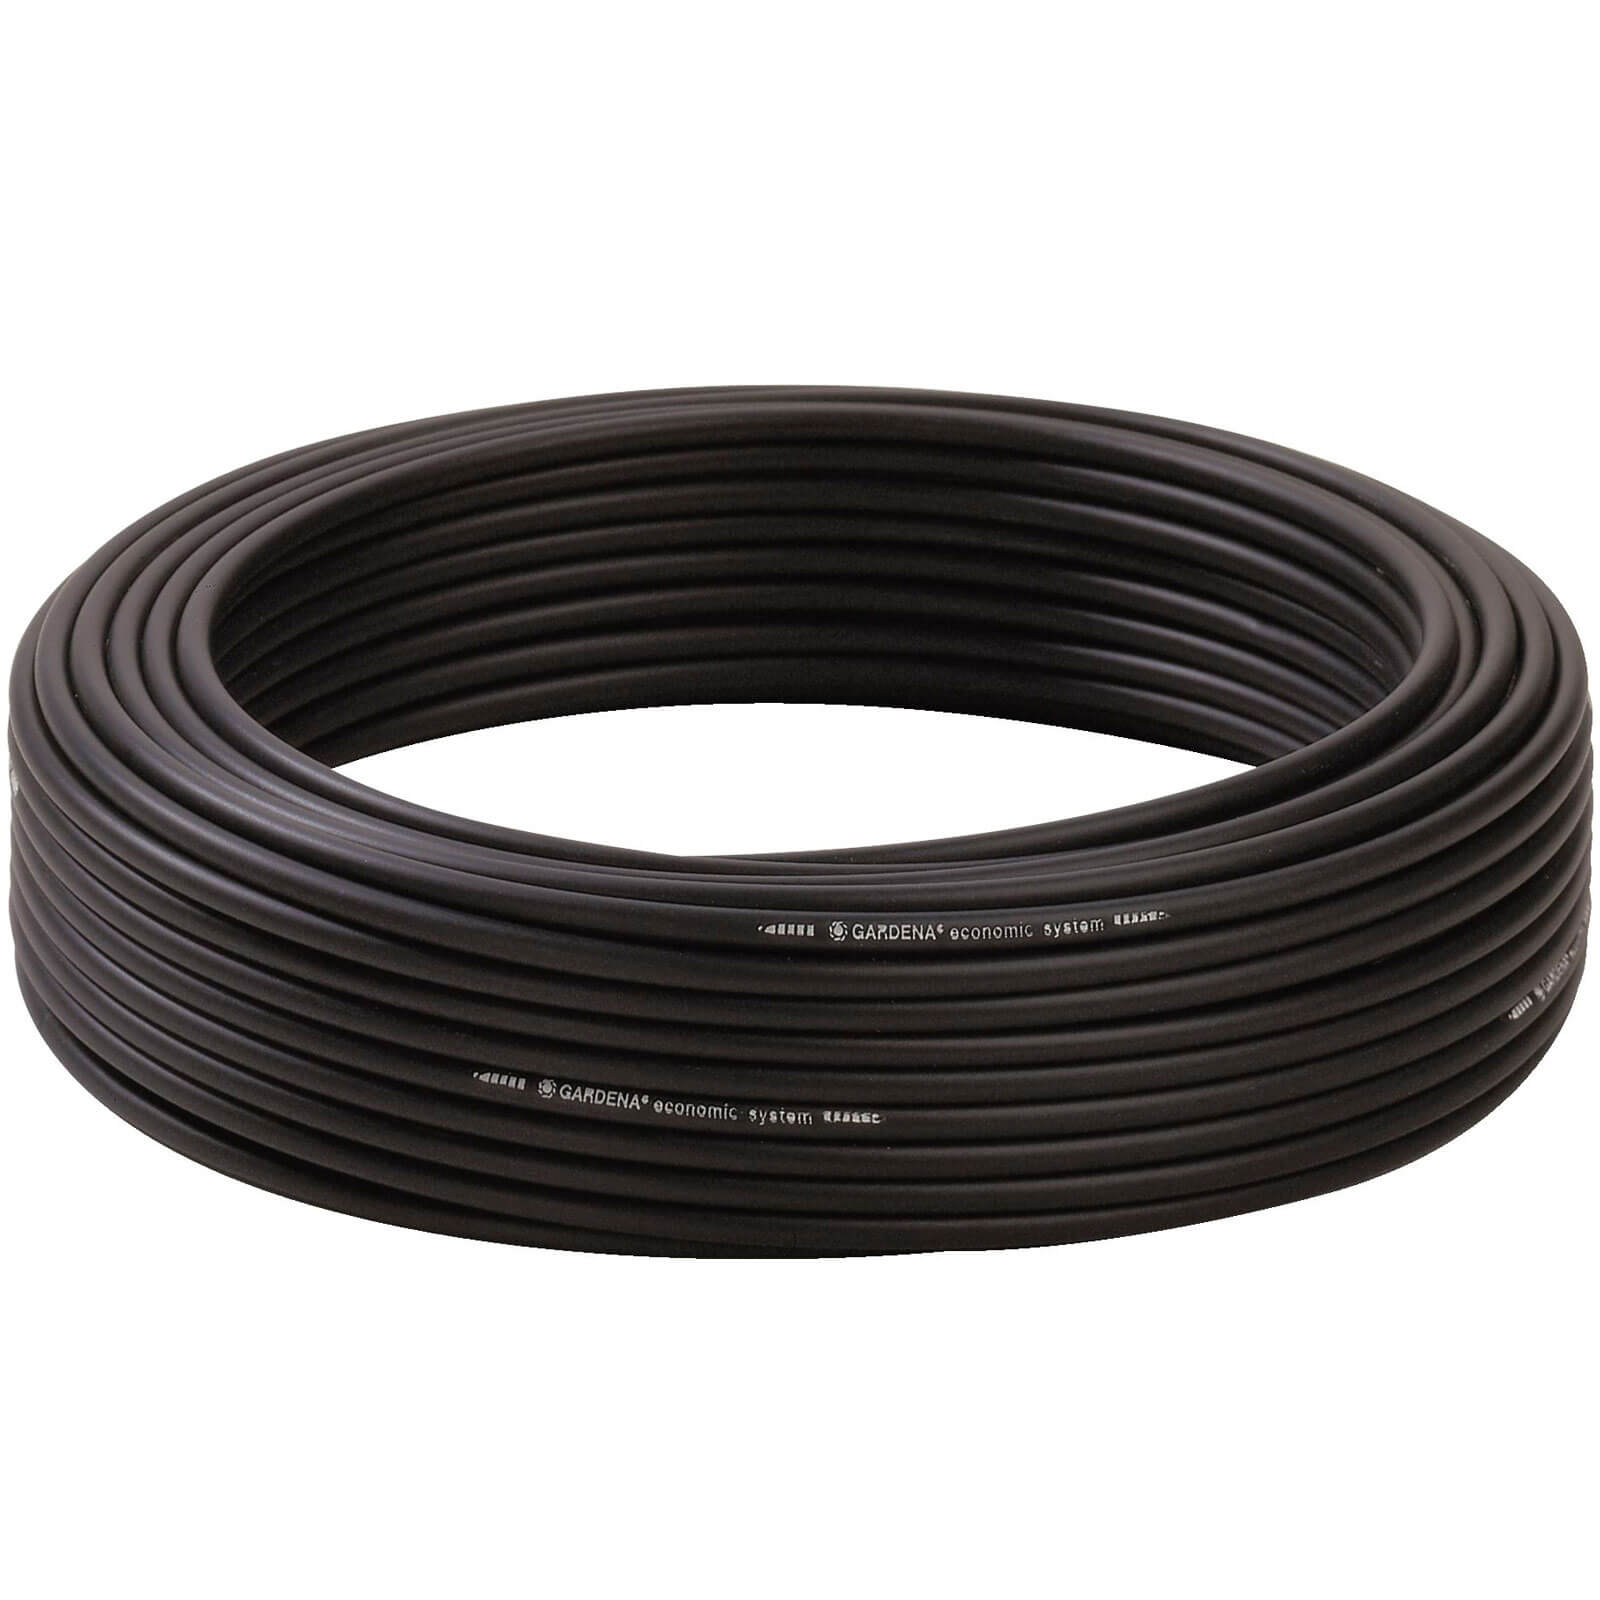 Image of Gardena MICRO DRIP Connecting Irrigation Pipe 3/16" / 4.6mm 15m